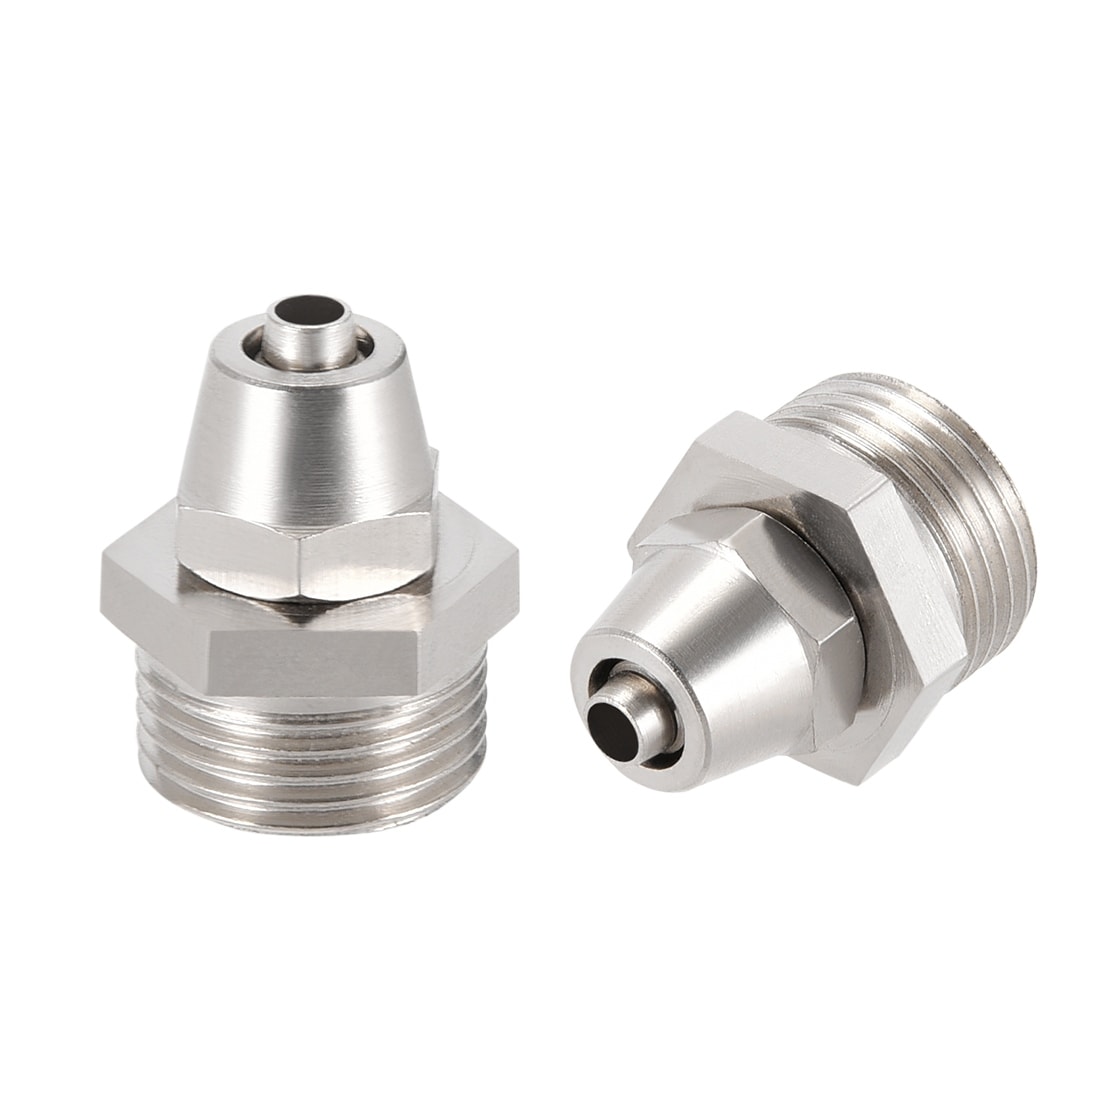 Male & Female Air Line Hose Connector Fitting Quick Release 1/4" 3/8" 1/2" BSP 